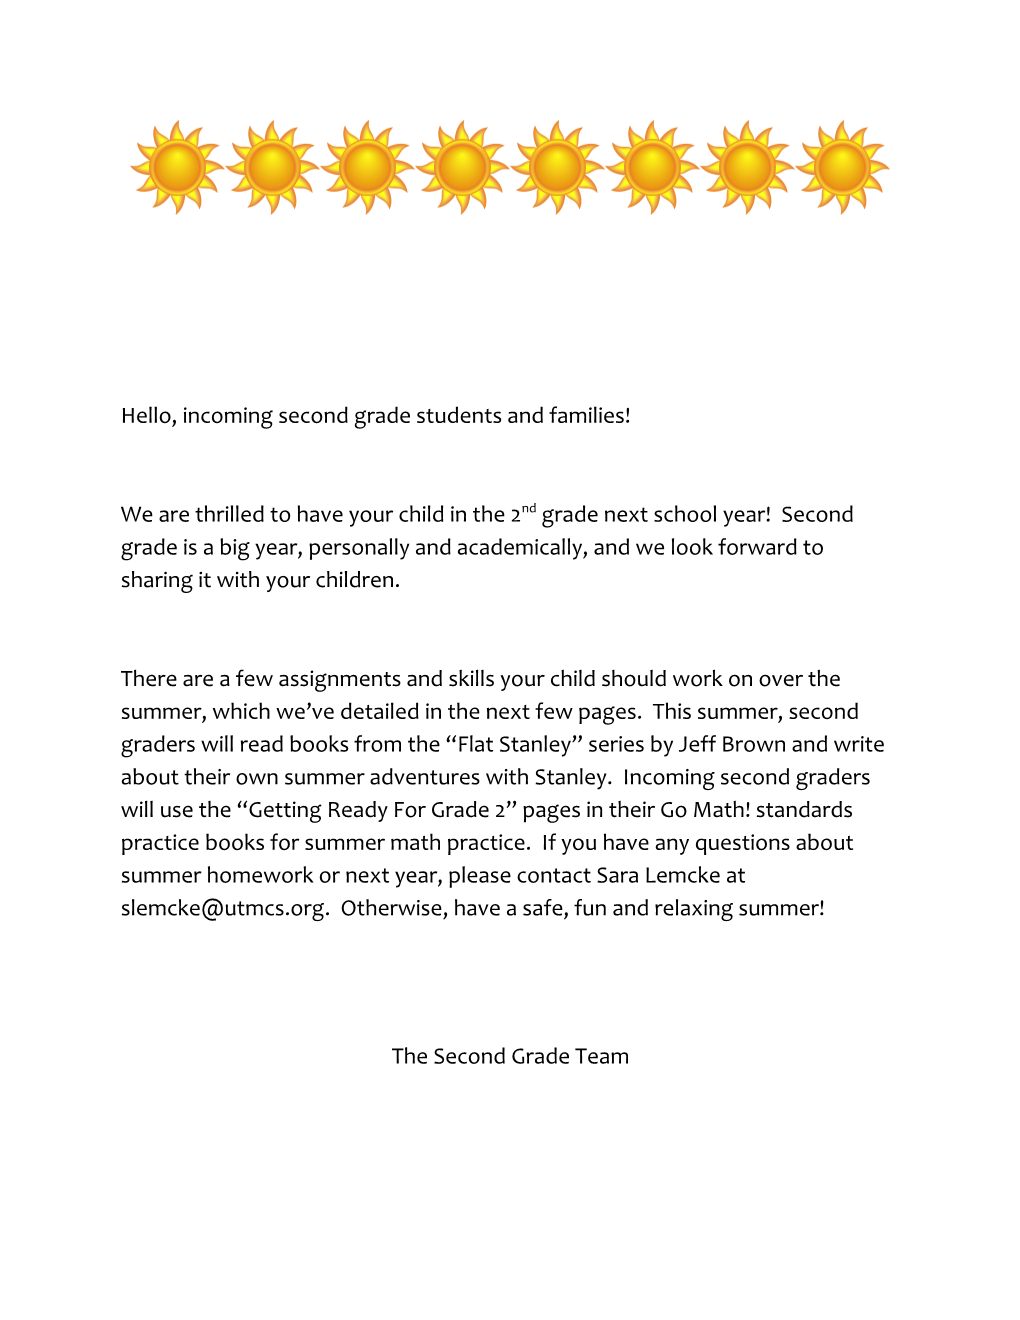 Hello, Incoming Second Grade Students and Families!